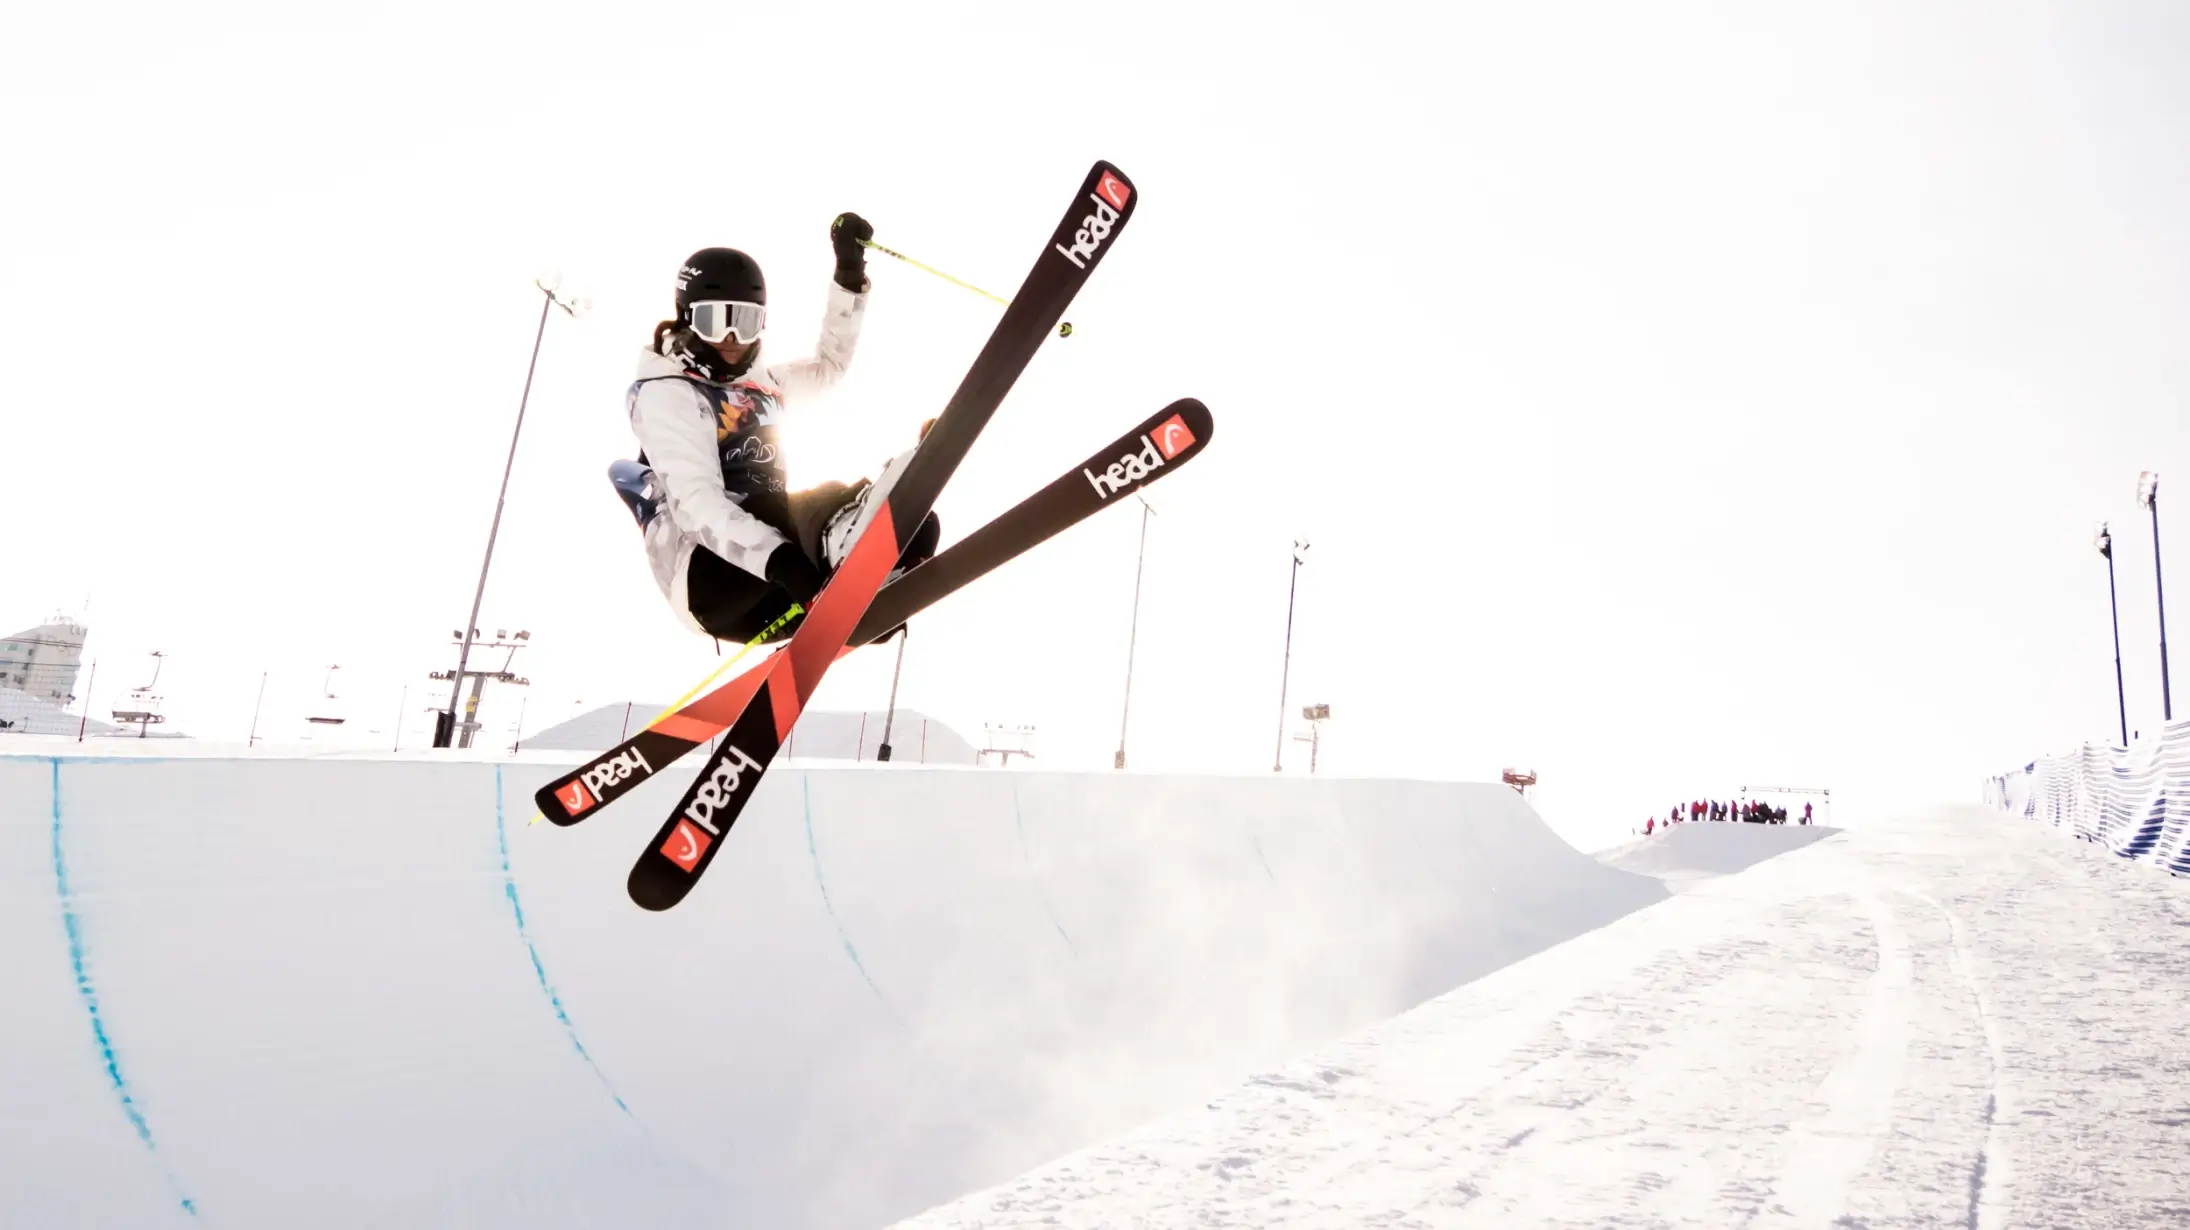 FIS-Freestyle-Skiing-World-Cup